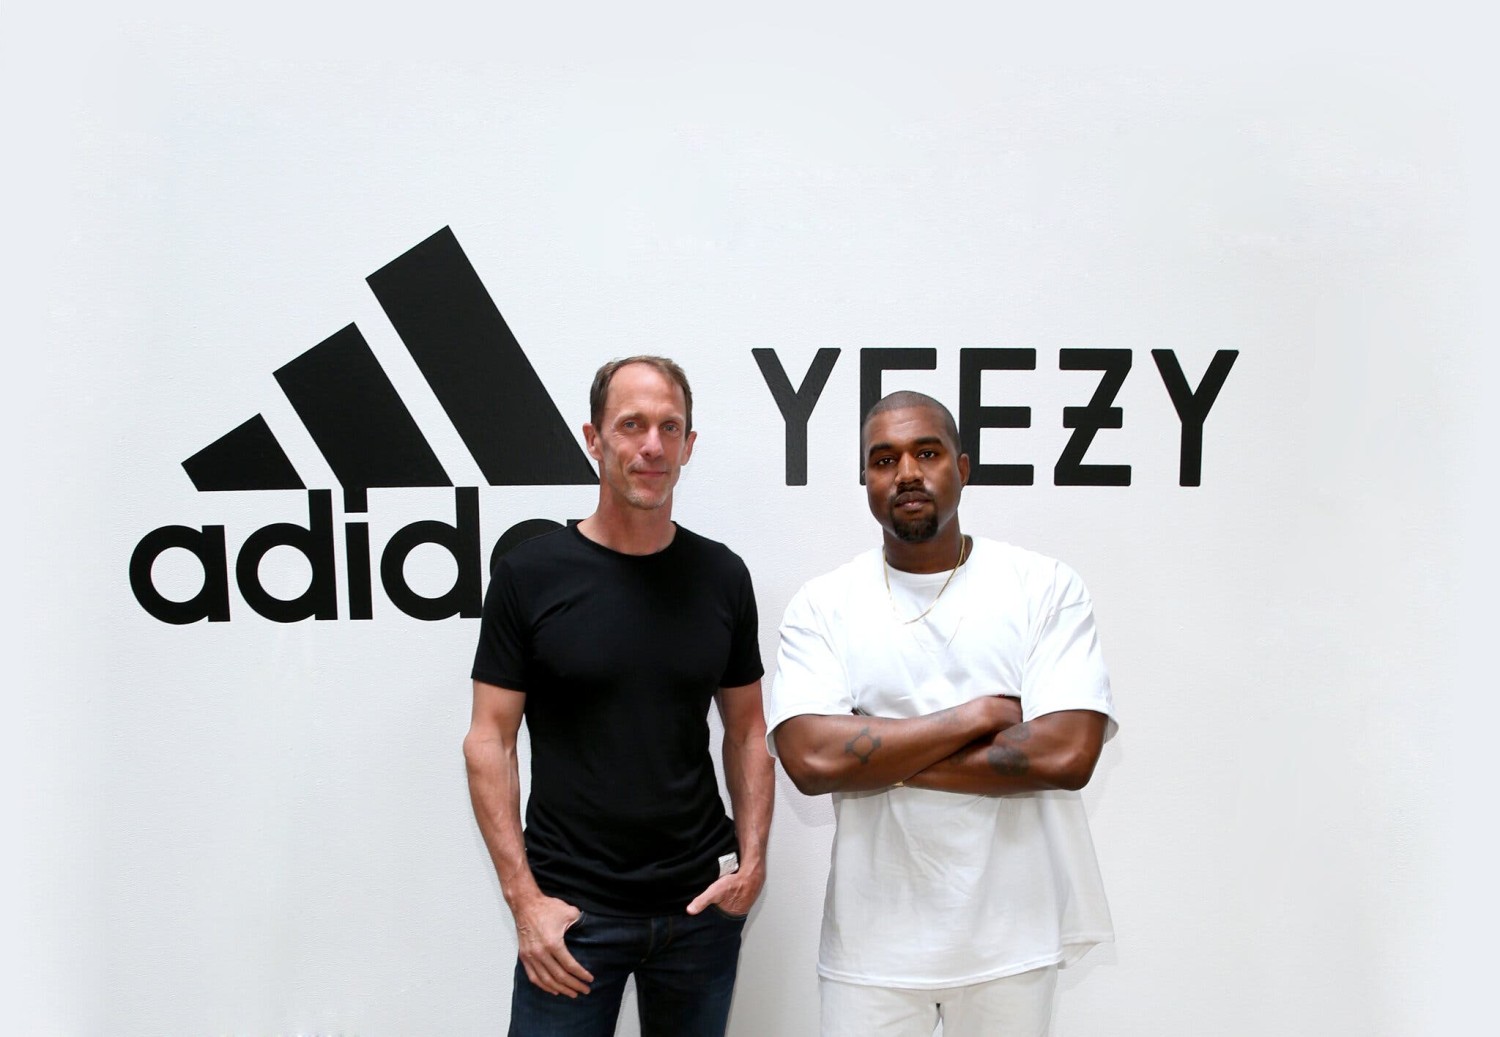 Eric Liedtke, who served on the Adidas executive board, helped oversee the Yeezy partnership.Credit...Jonathan Leibson/Getty Images for ADIDAS